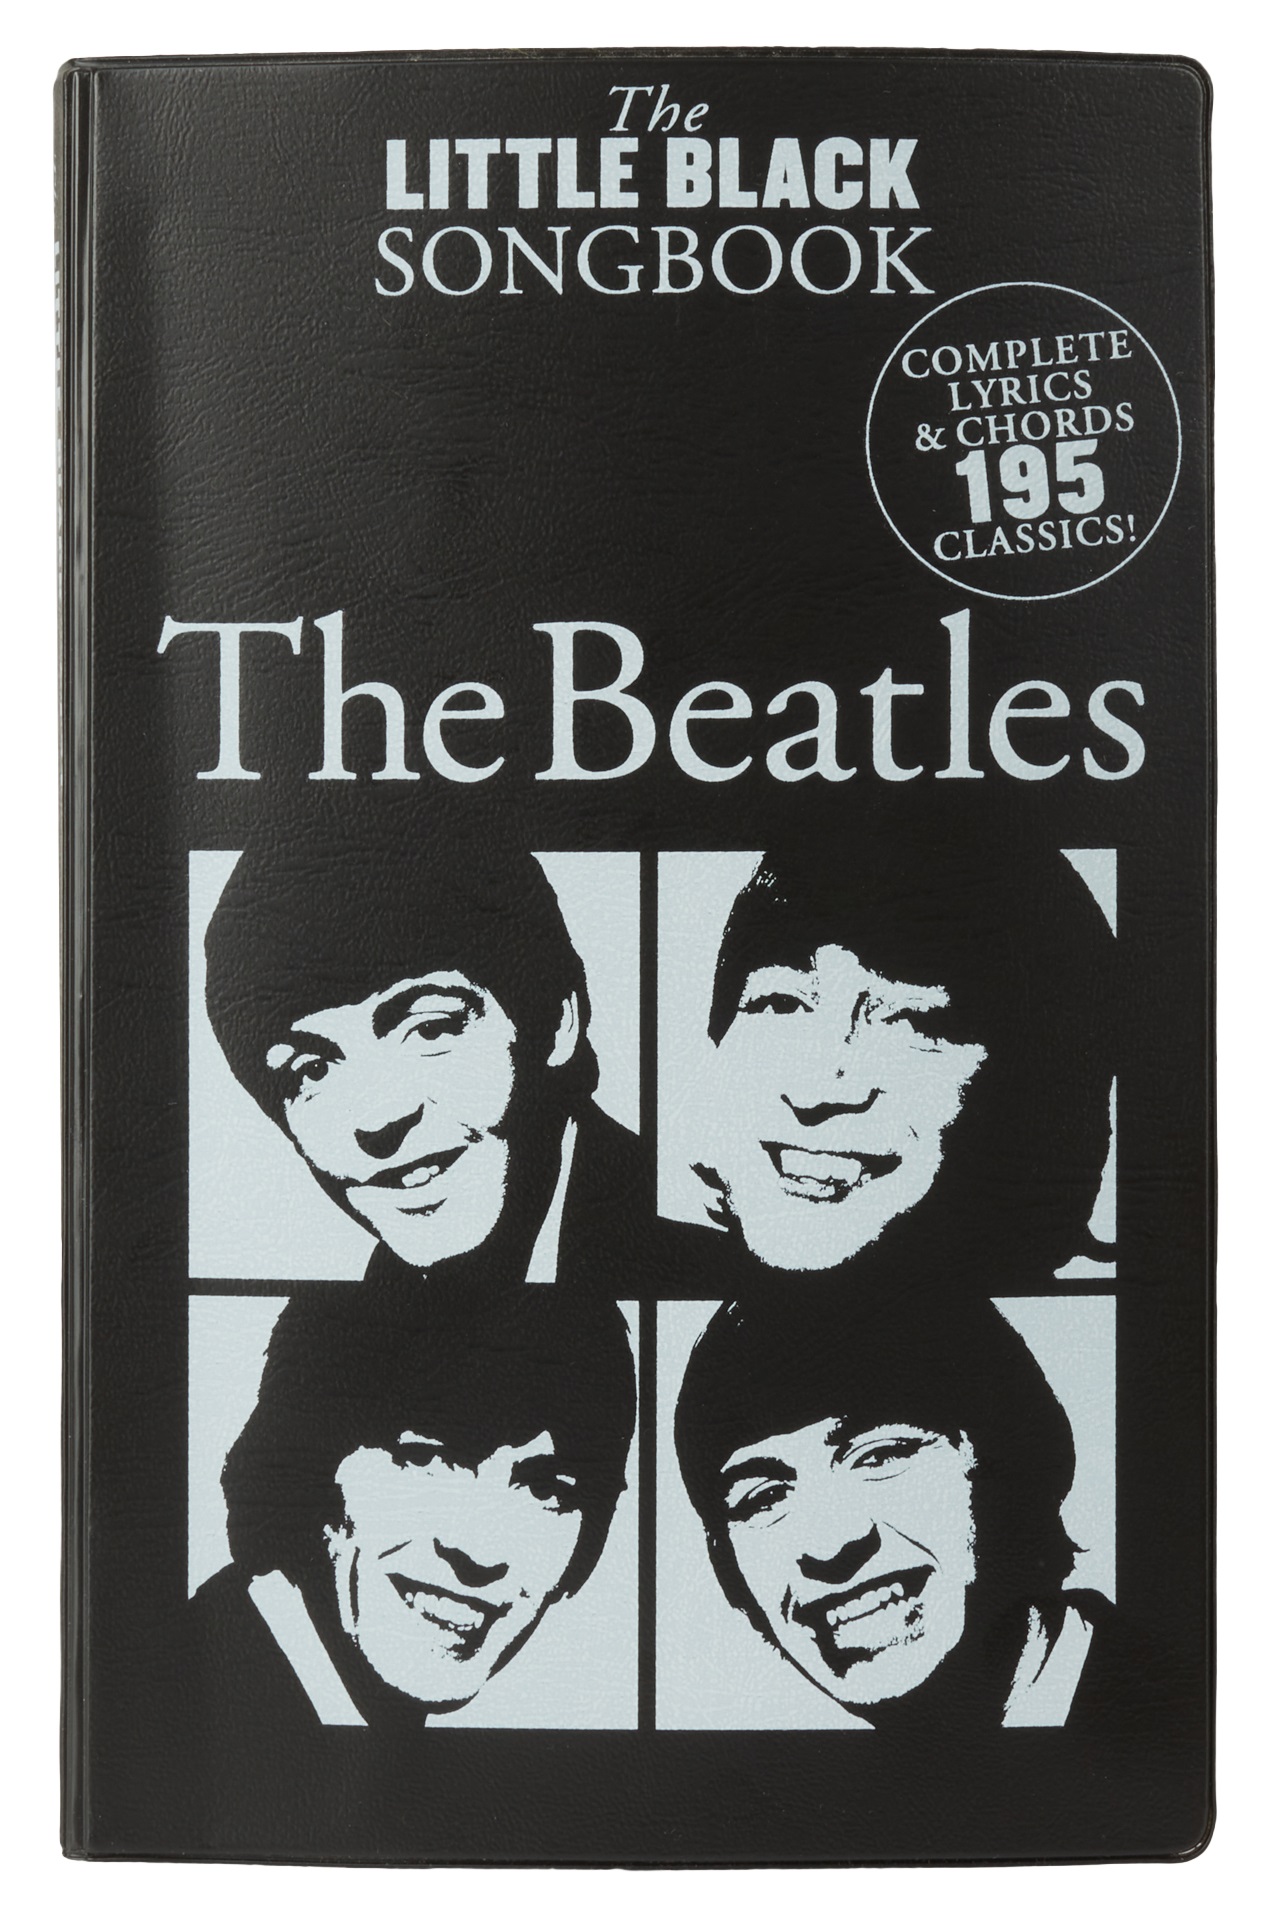 Fotografie MS The Little Black Songbook: The Beatles